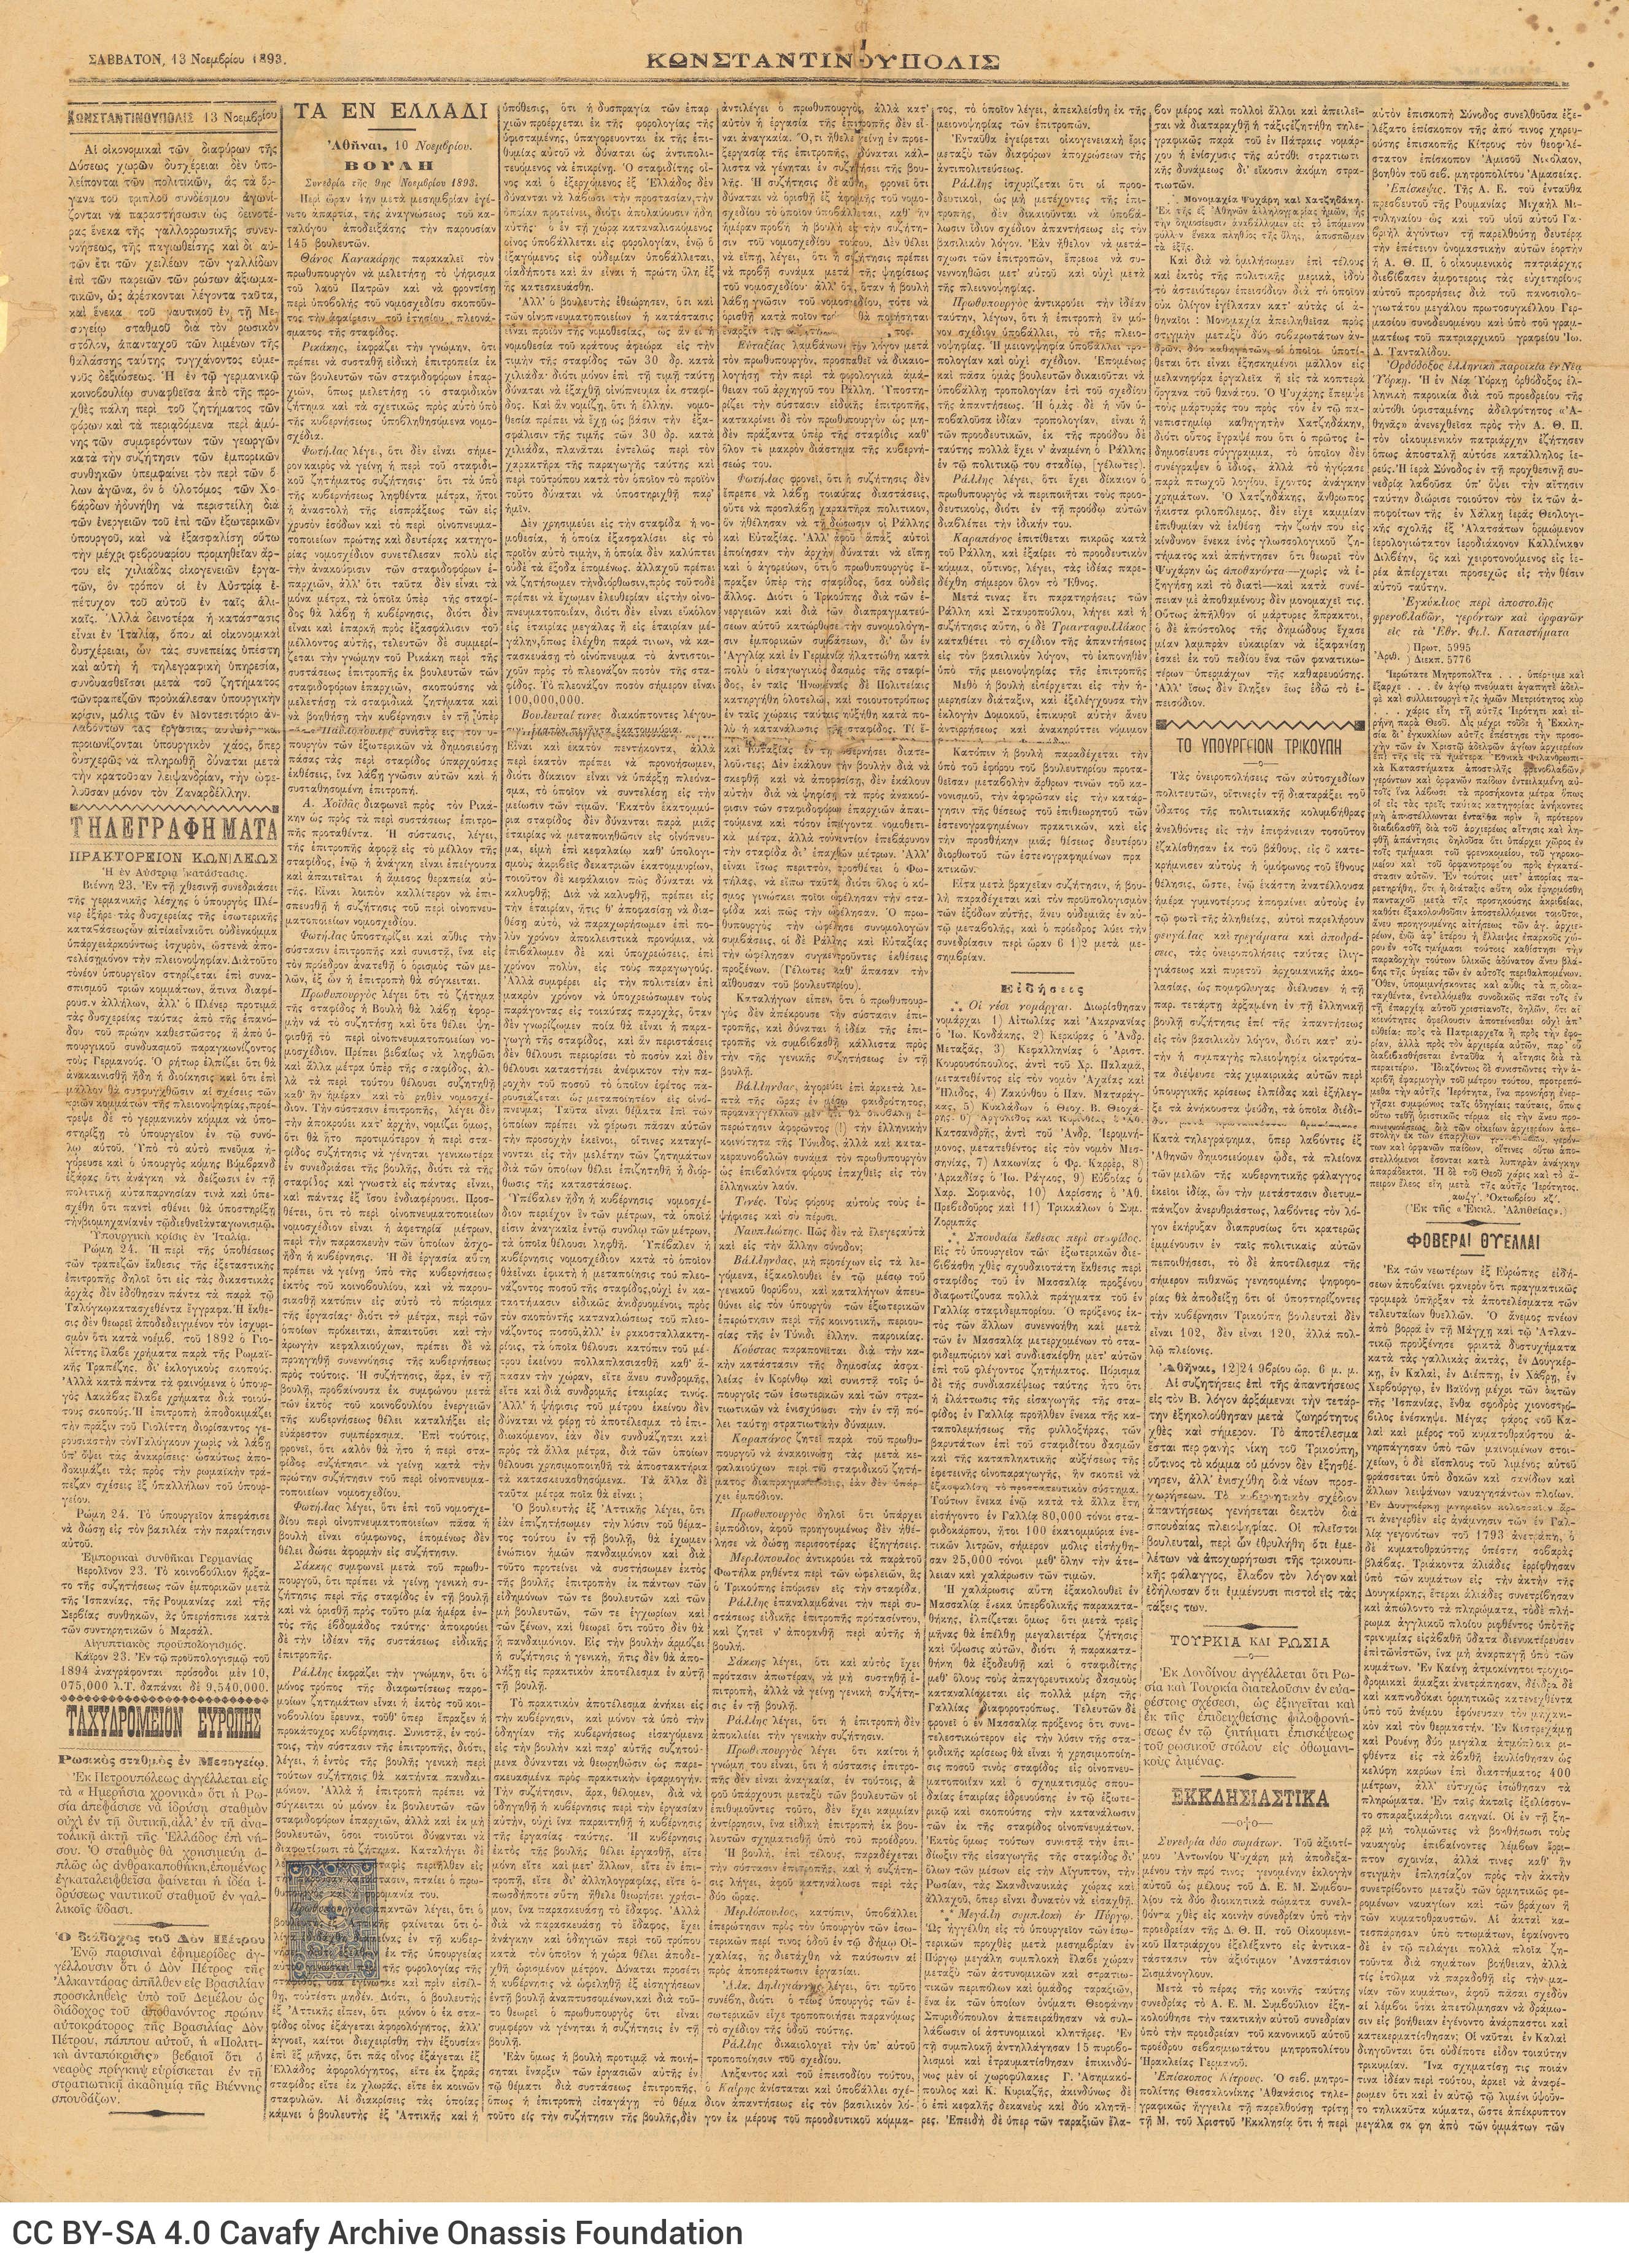 Issue of the newspaper *Konstantinoupolis*. Article by Cavafy on the first page, entitled "Ellinika ichni en to Sakespiro" an